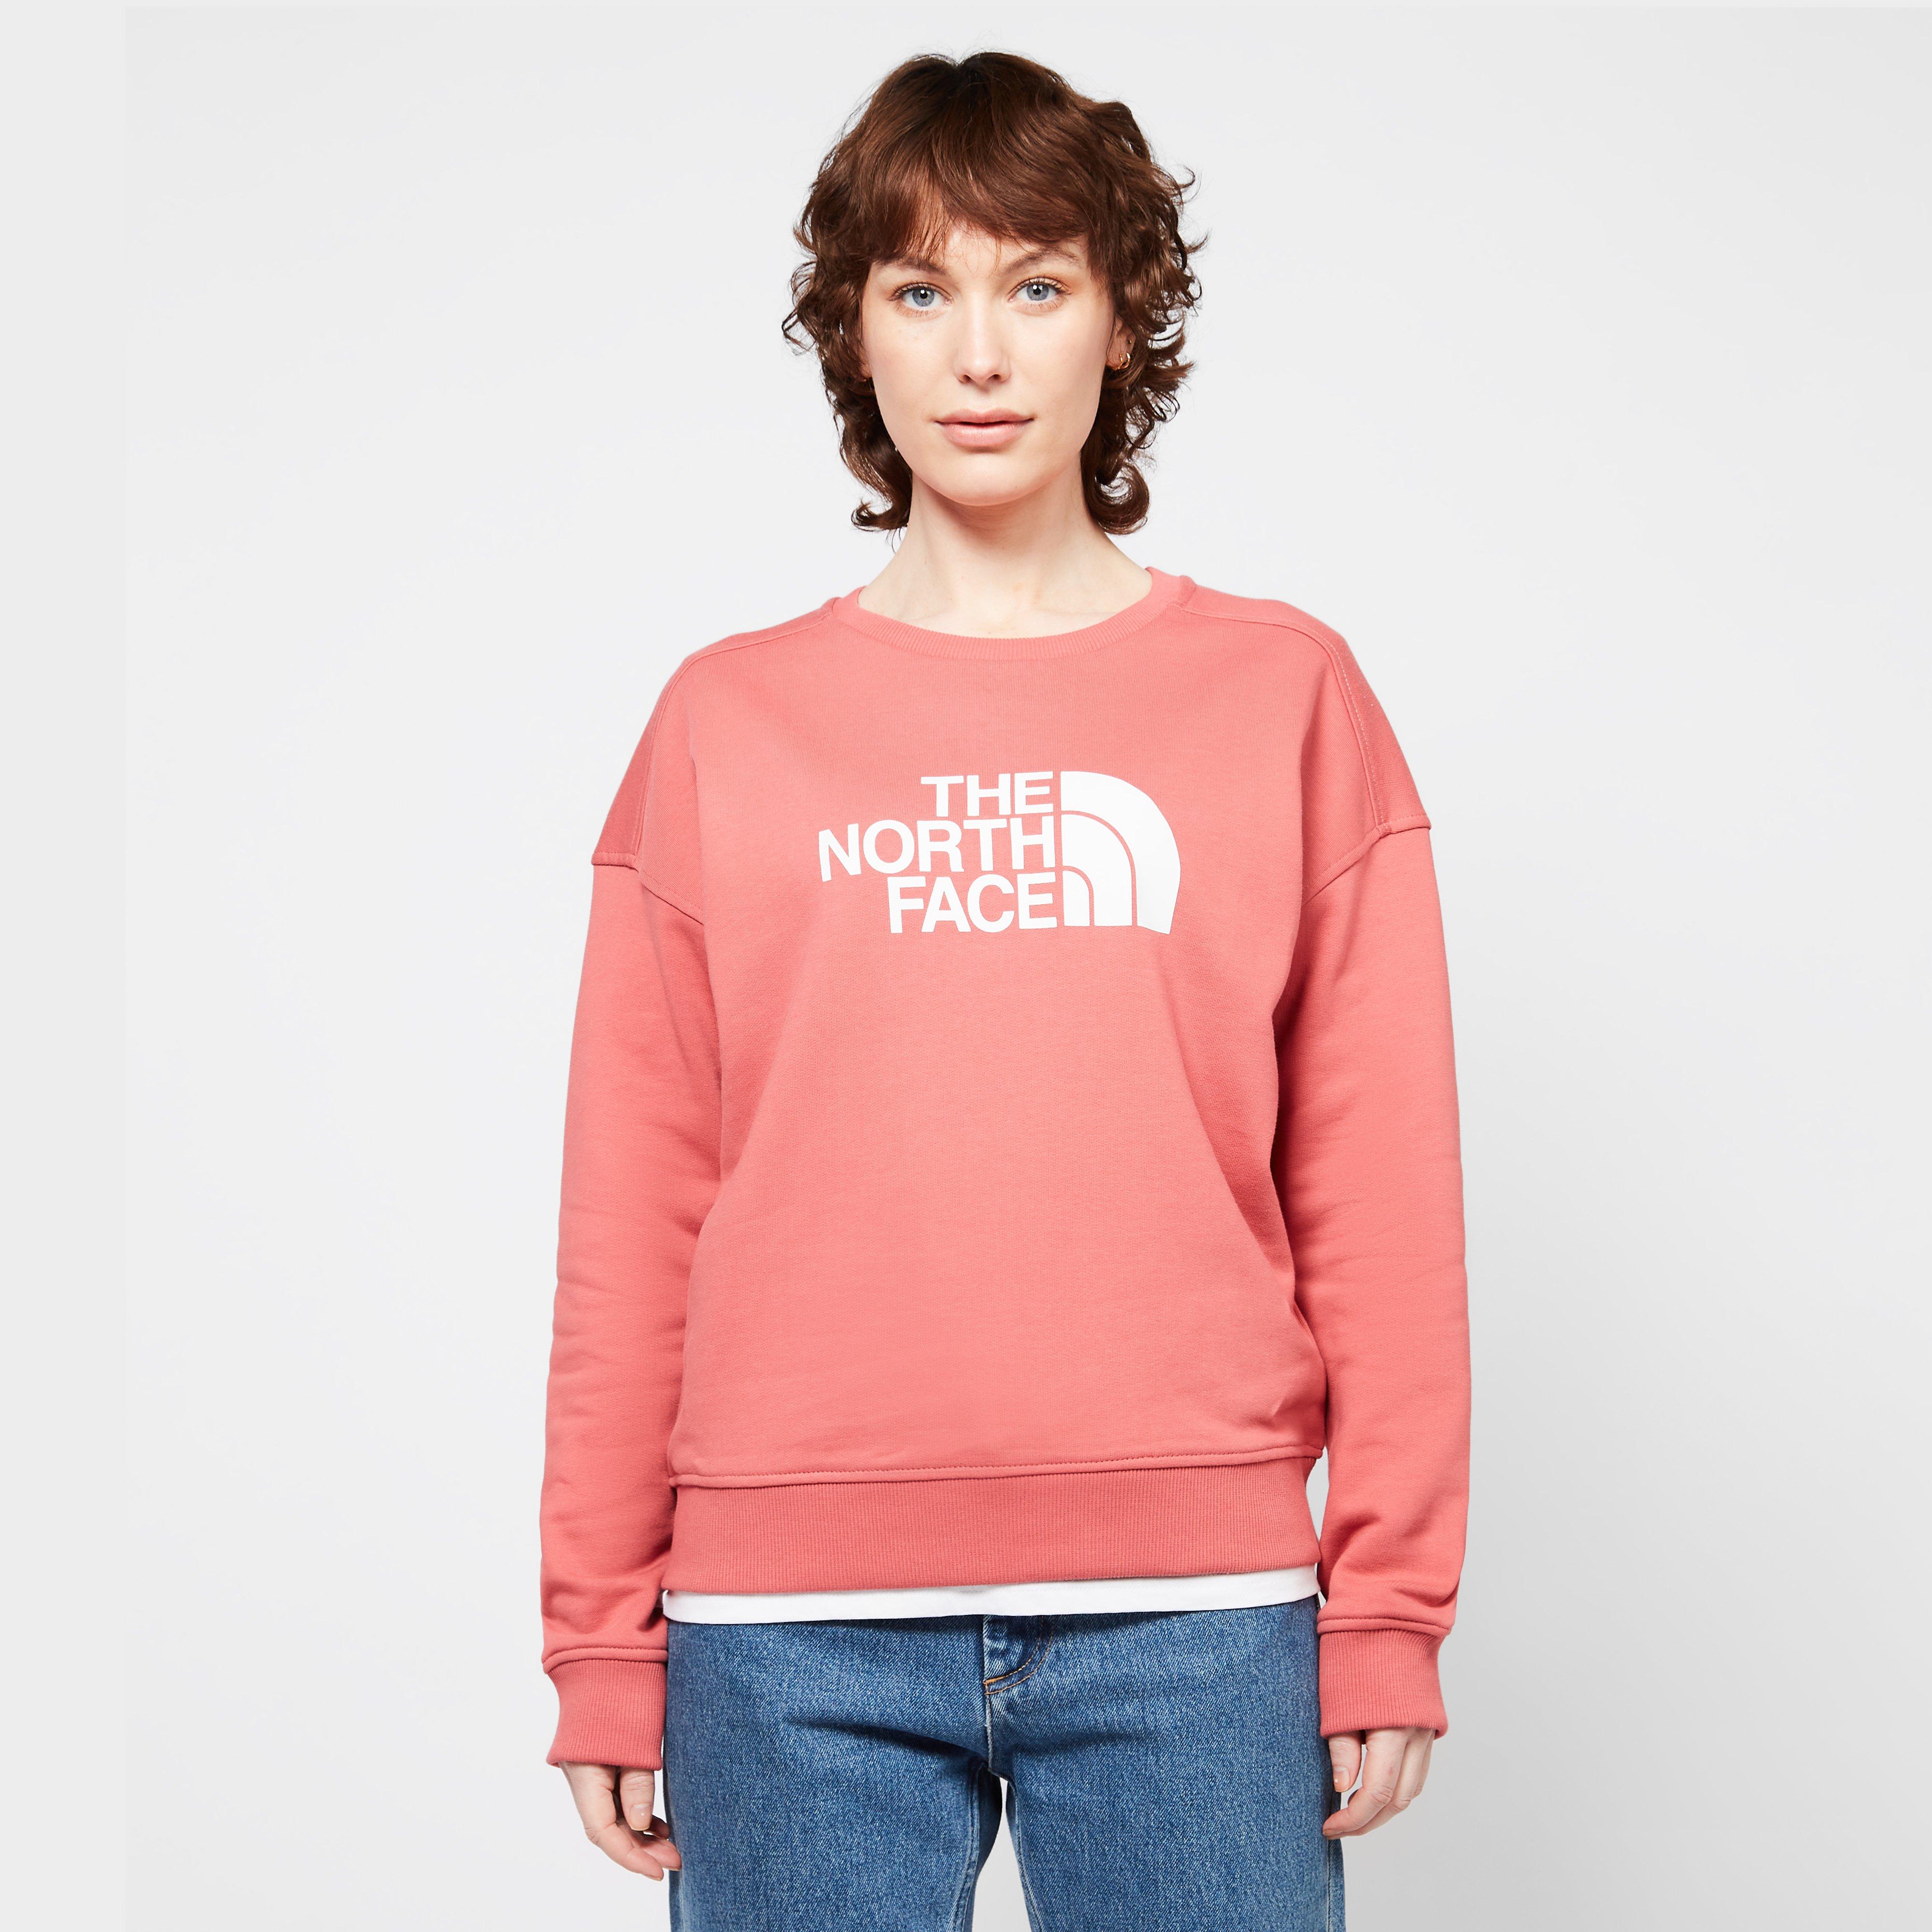 The North Face Womens Drew Peak Crew Sweater - Pink/pink  Pink/pink